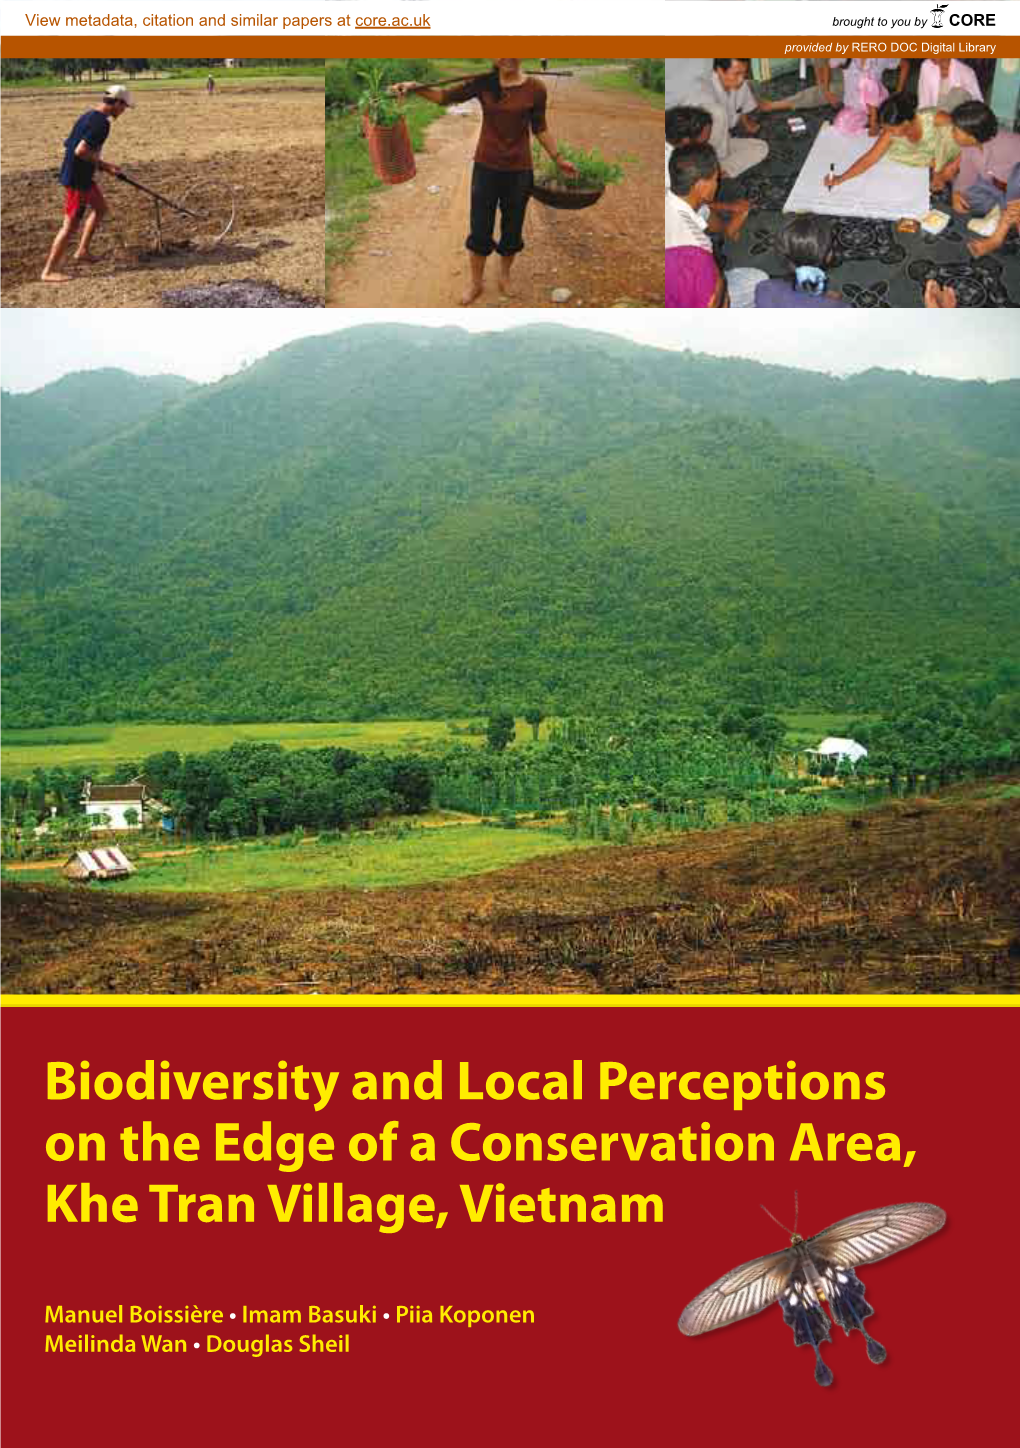 Biodiversity and Local Perceptions on the Edge of a Conservation Area, Assessments, with Little Consideration for the Local People’S Opinions Or Perspectives